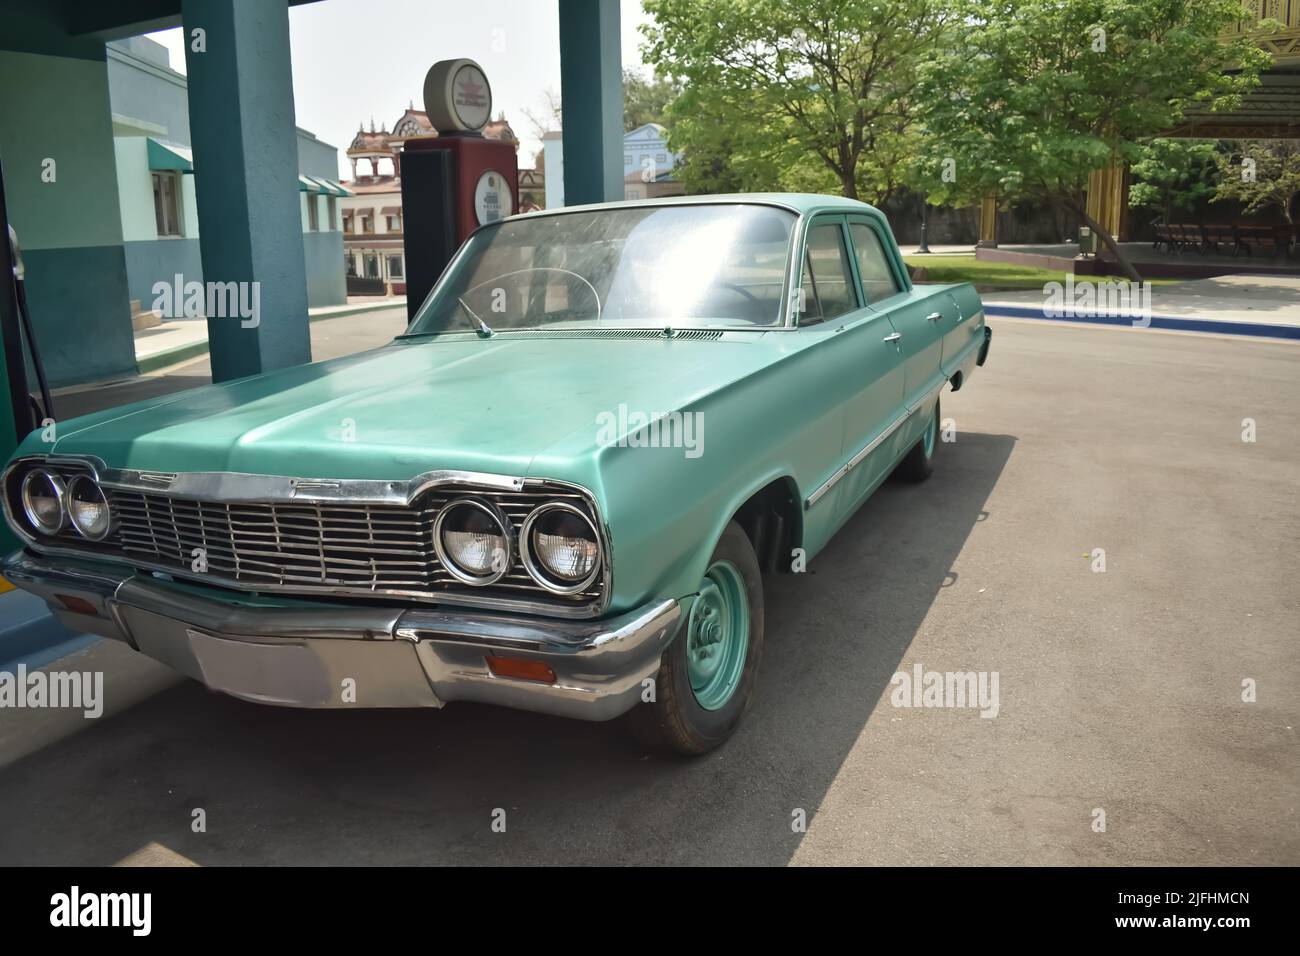 An Old Fashioned American Green colored car resembling Chevrolet  Impala parked near a petrol Bunk against a green background. It is a vintage Car Stock Photo